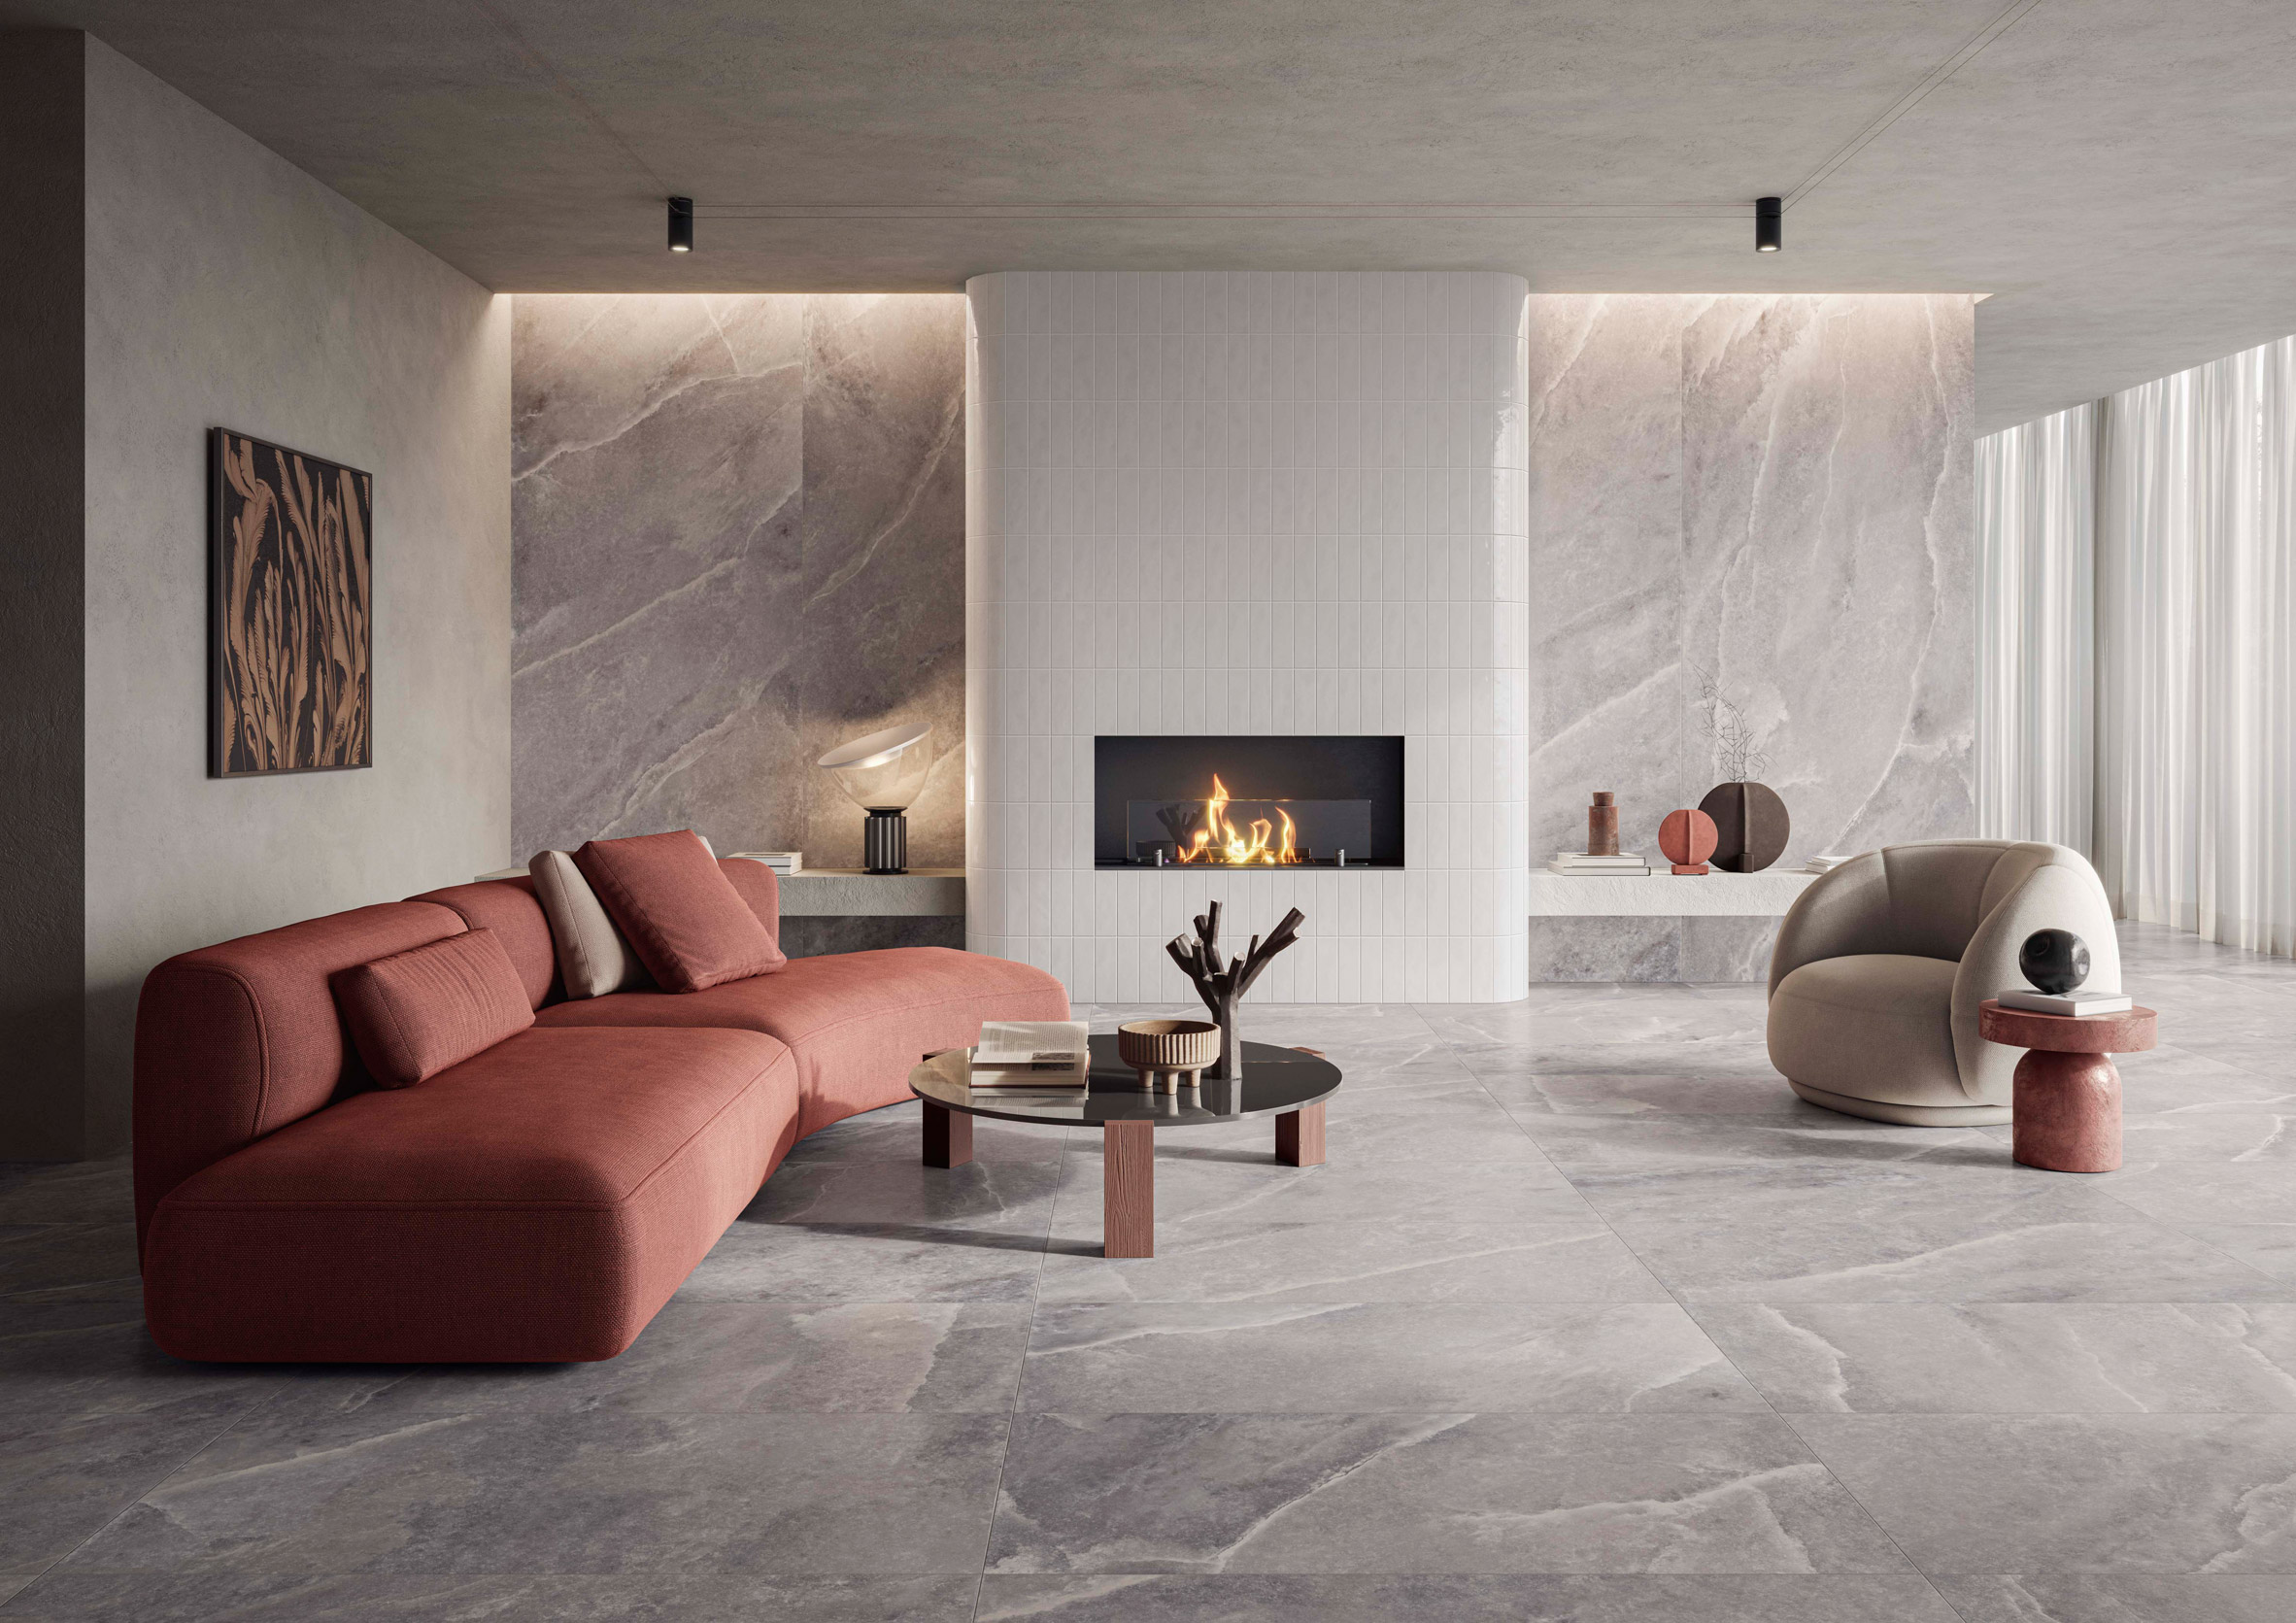 Living room with marble-style walls and floors